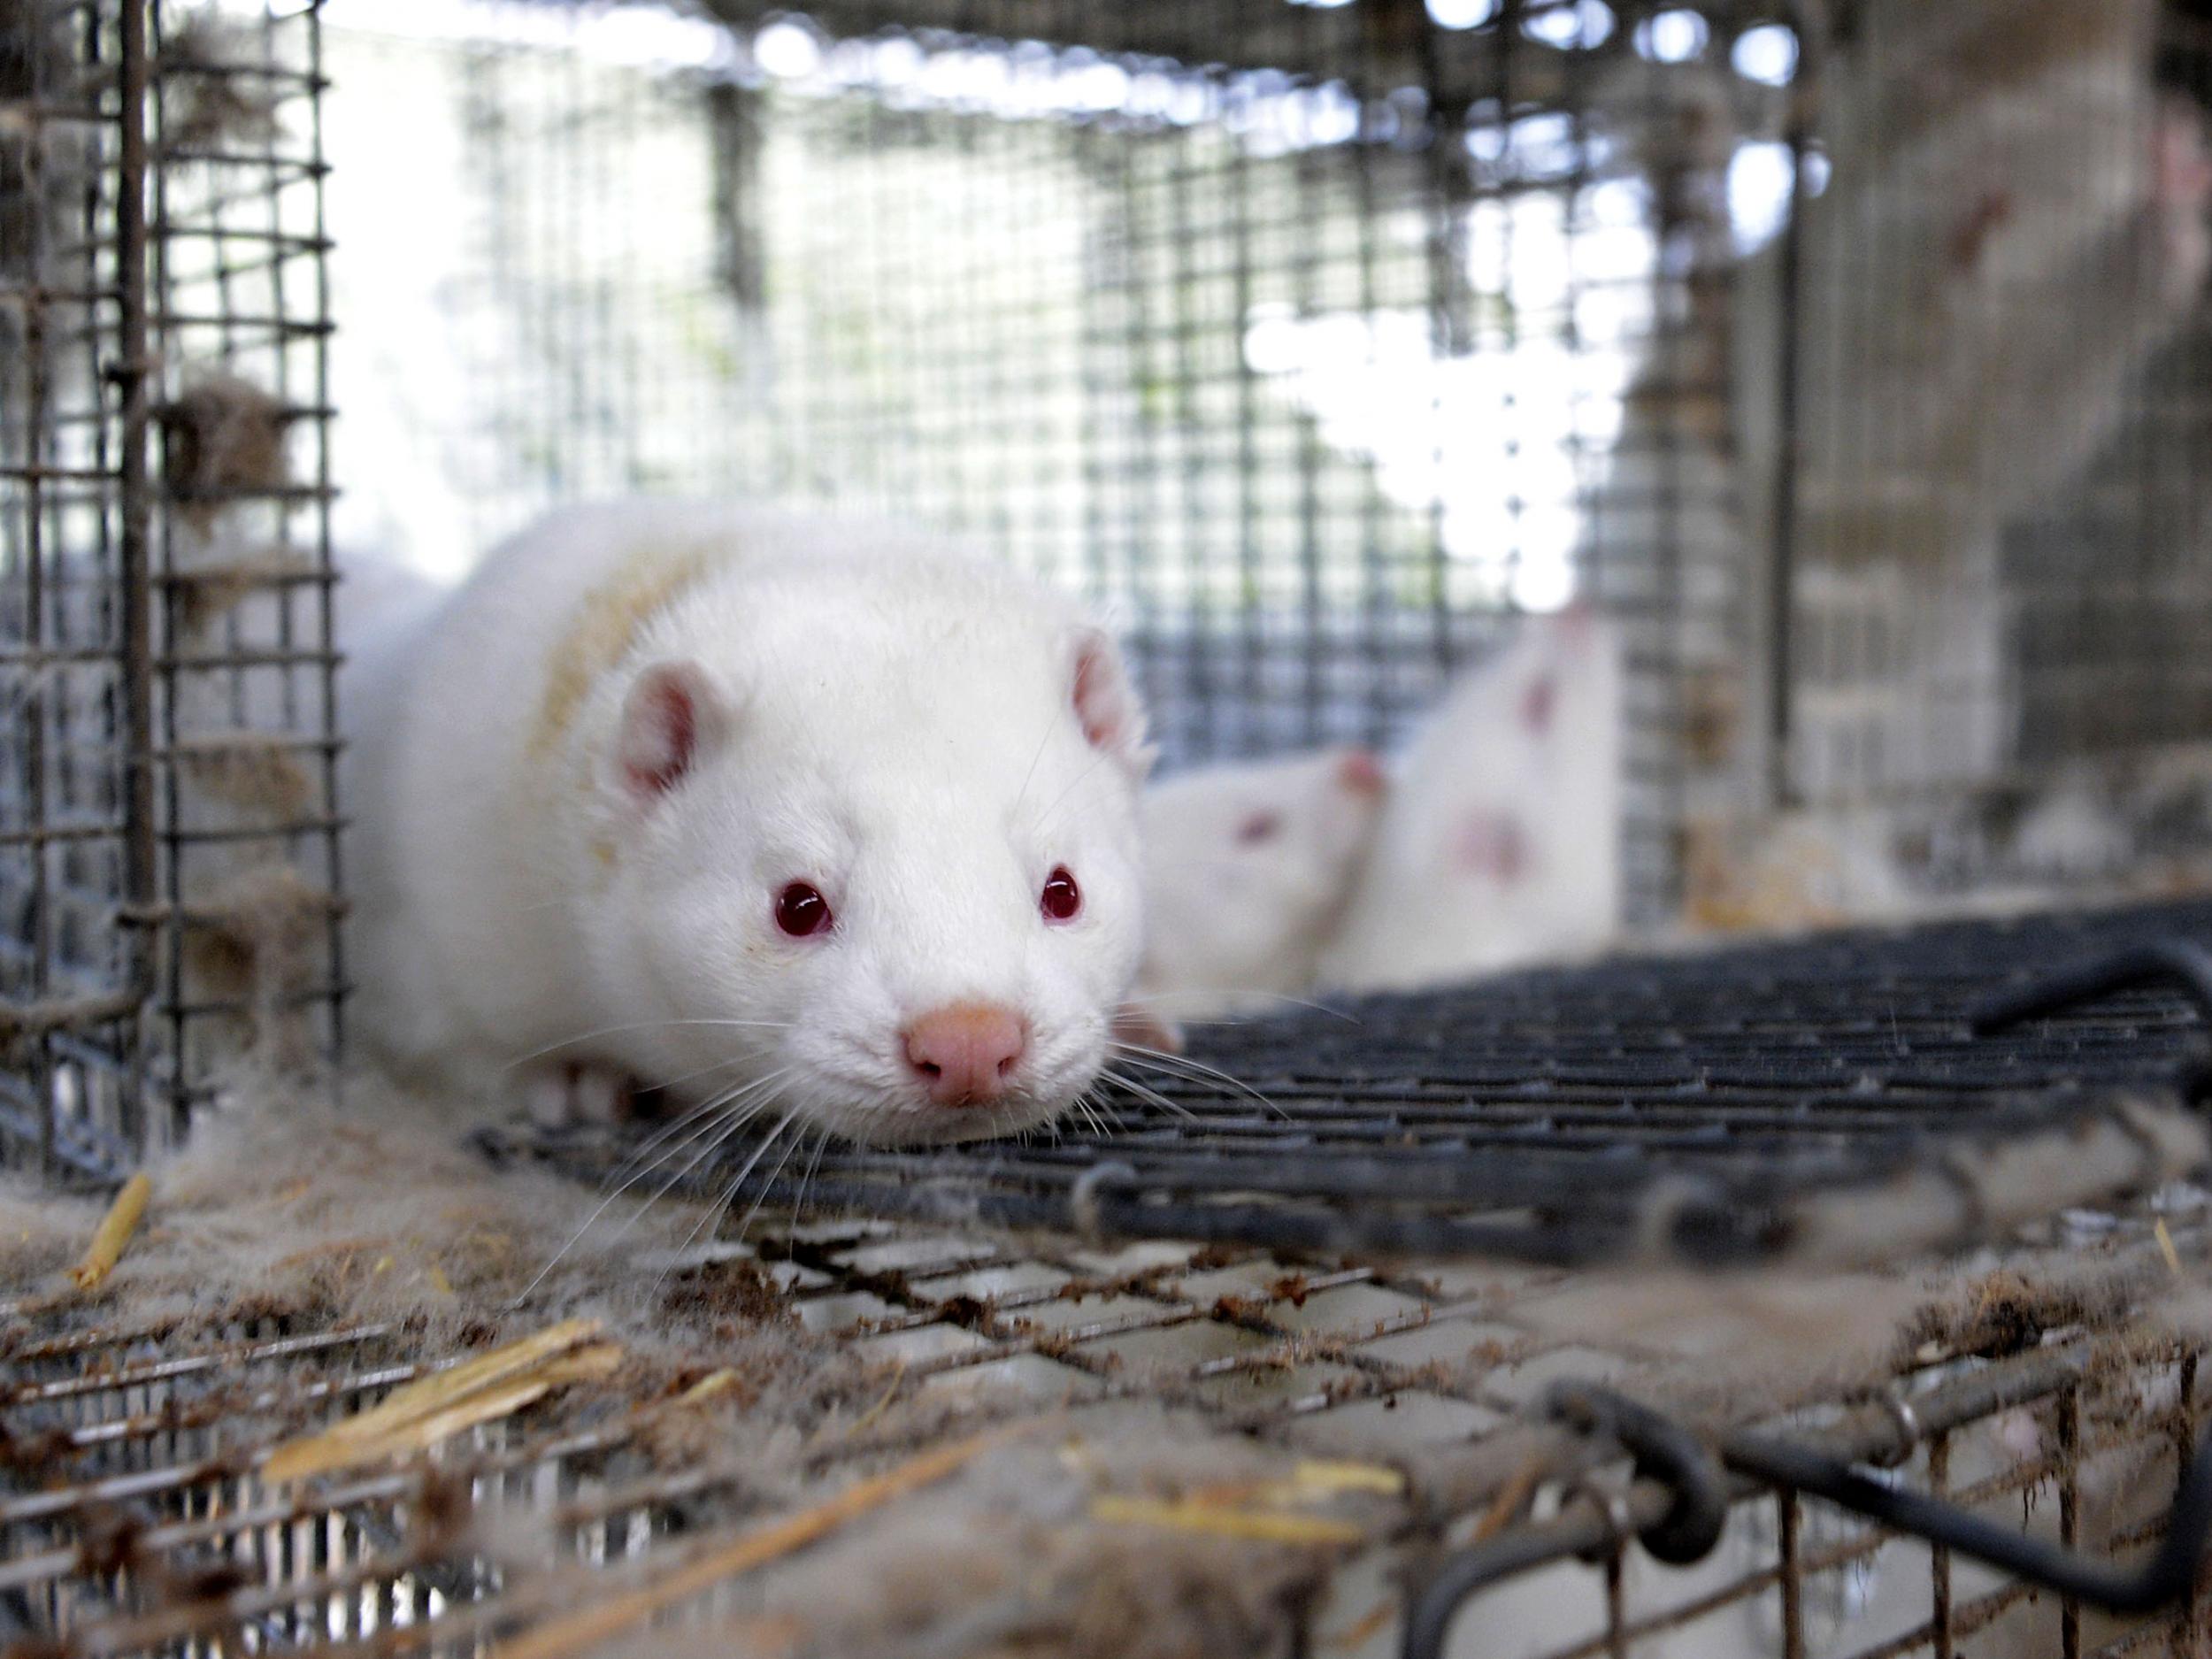 Norway has pledged to end mink and fox farming by 2025